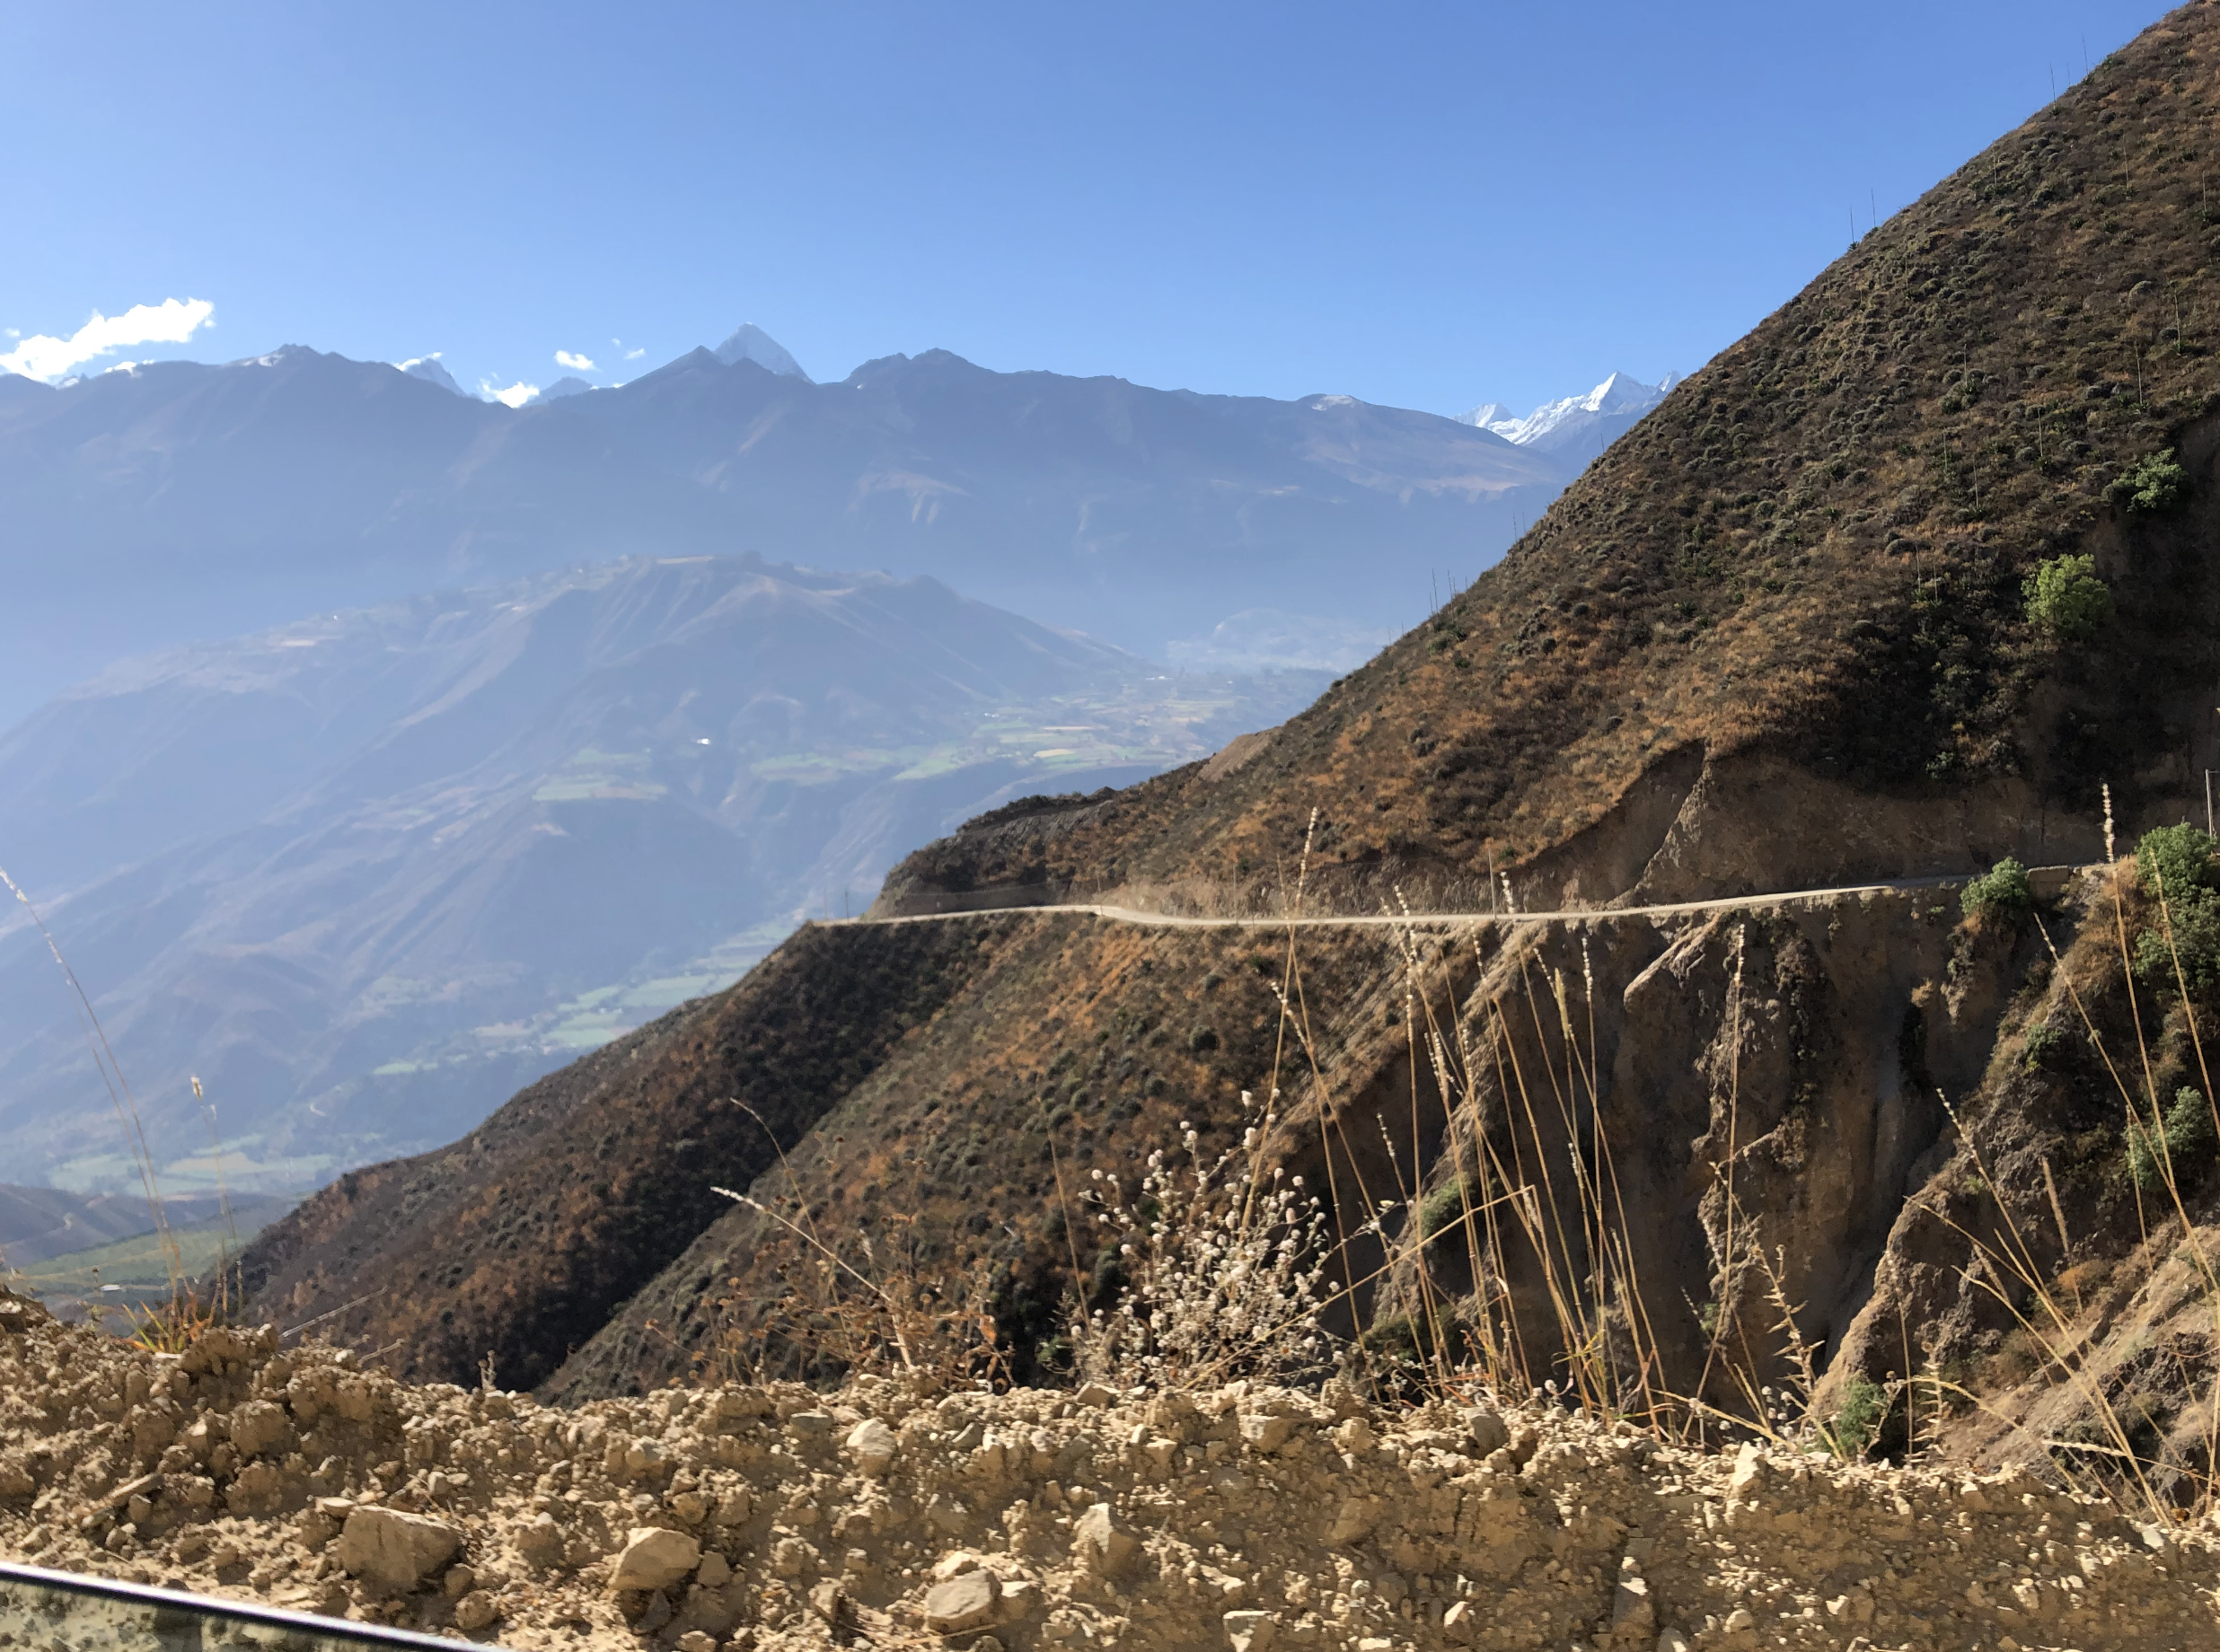 The road from the story, Peruvian Andes